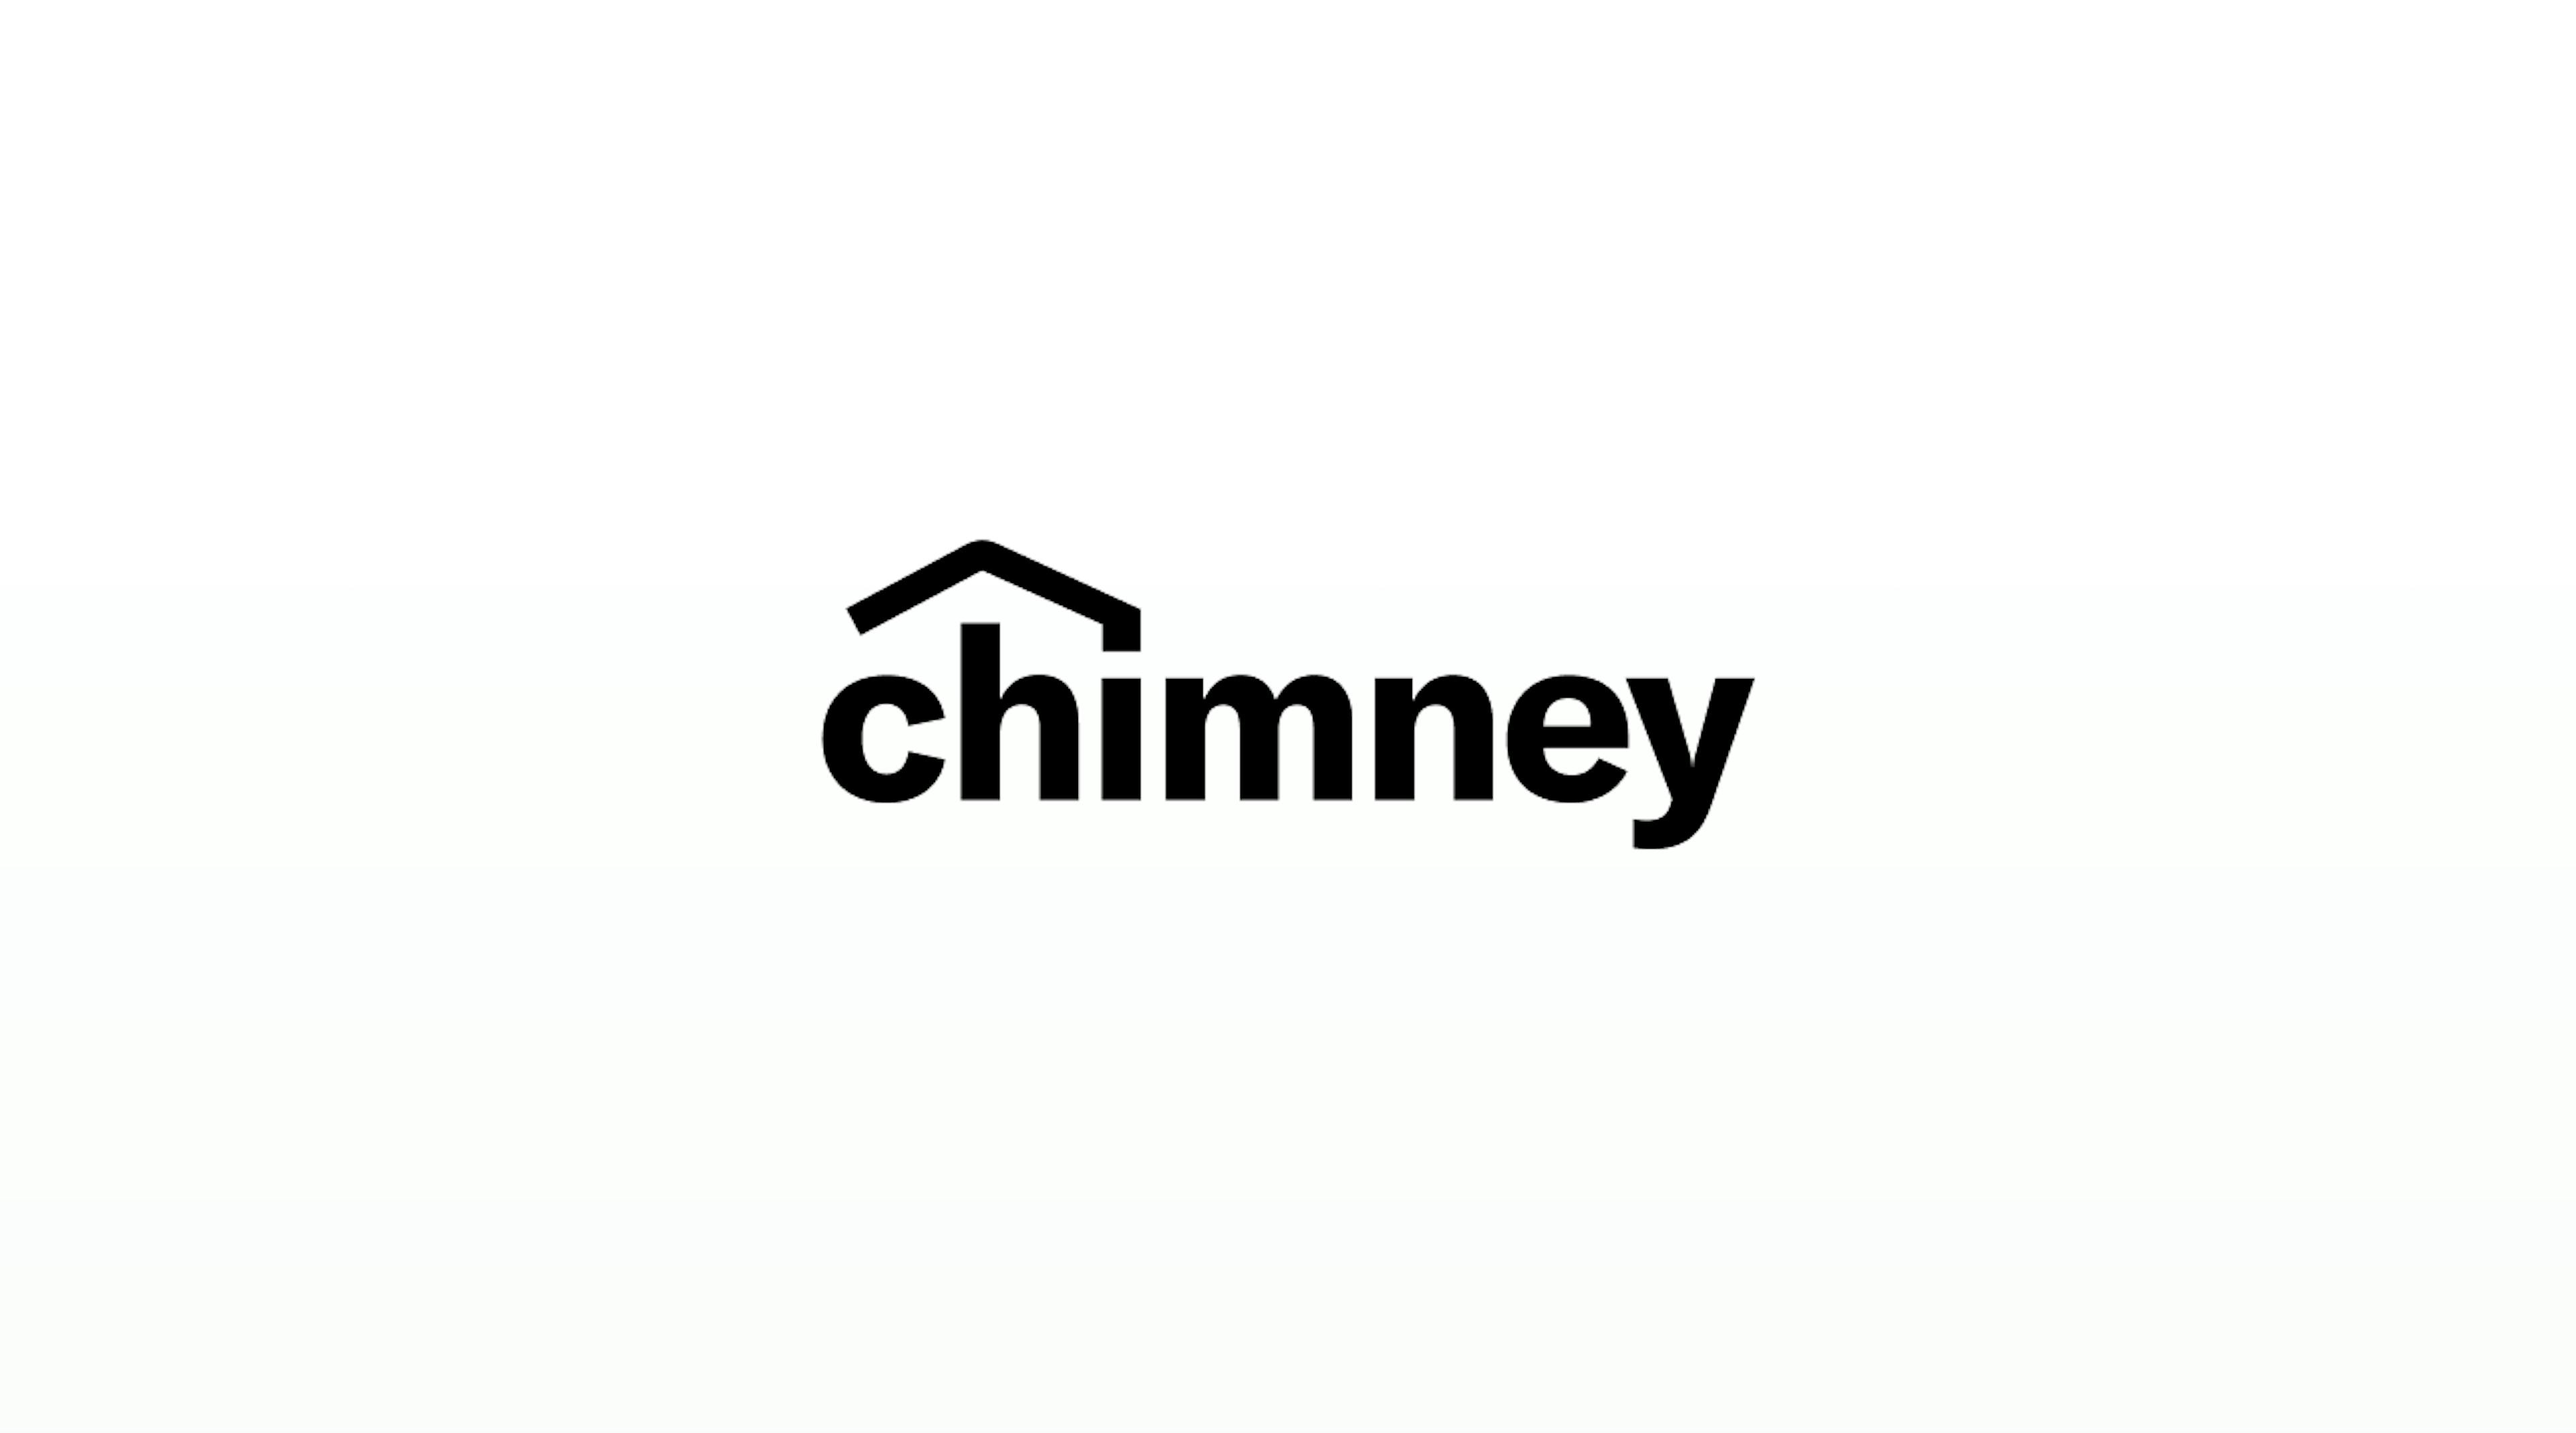 Chimney.io successfully closes a $1.3 million seed investment round.